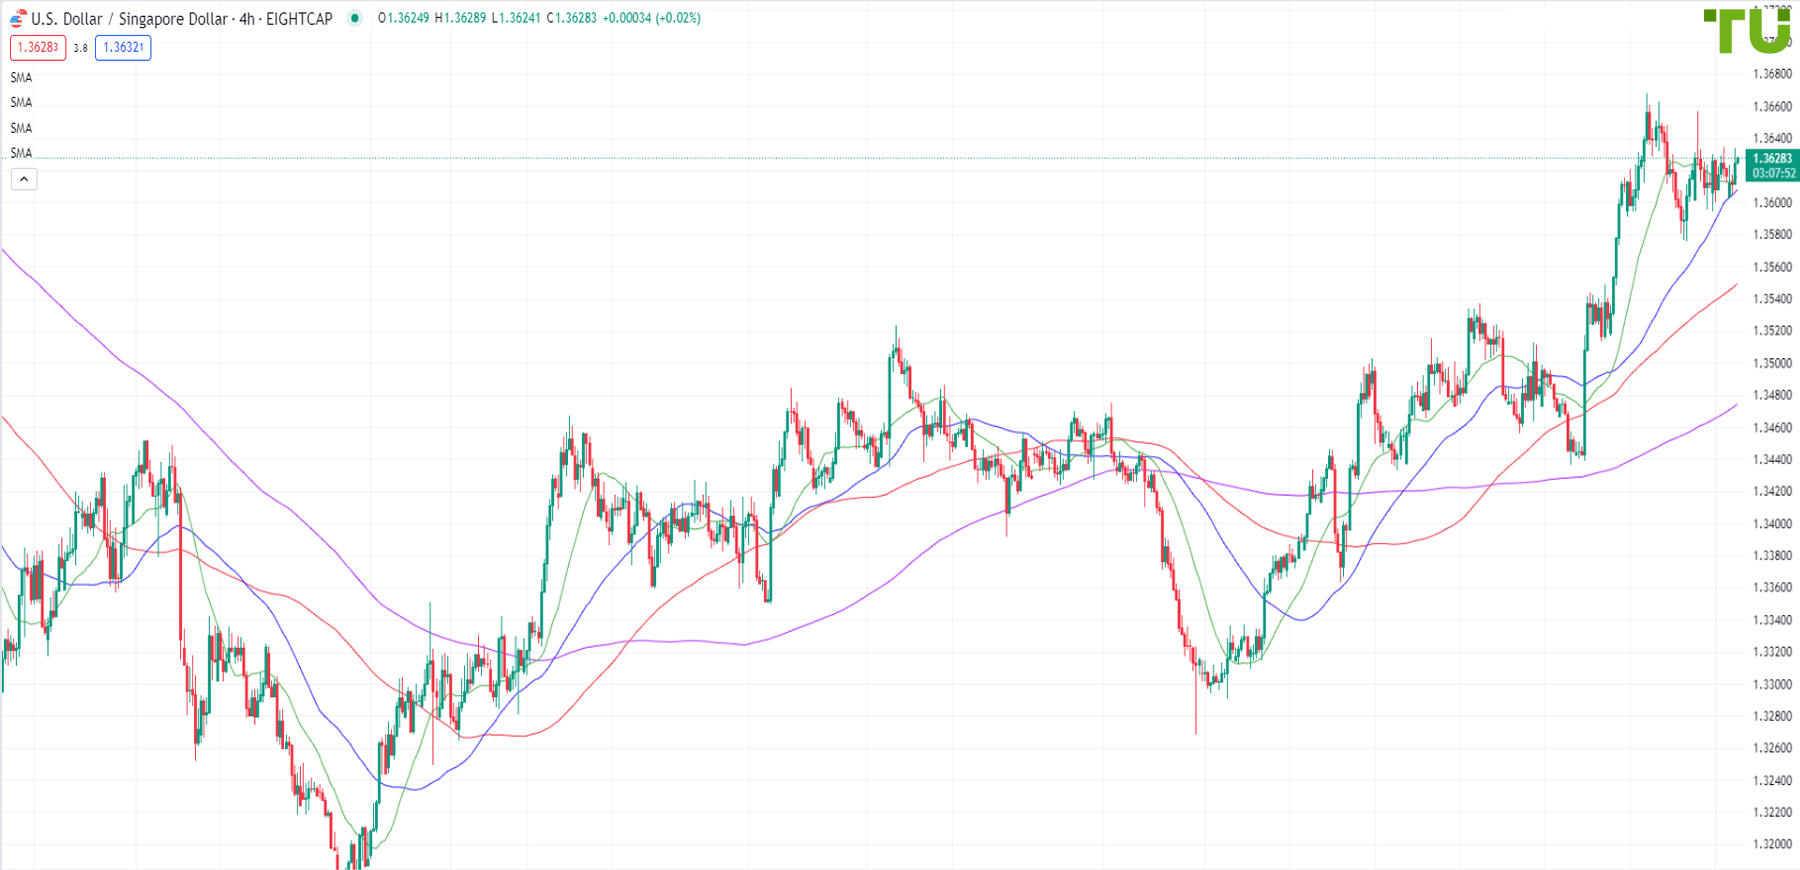 USD/SGD continues consolidation within range